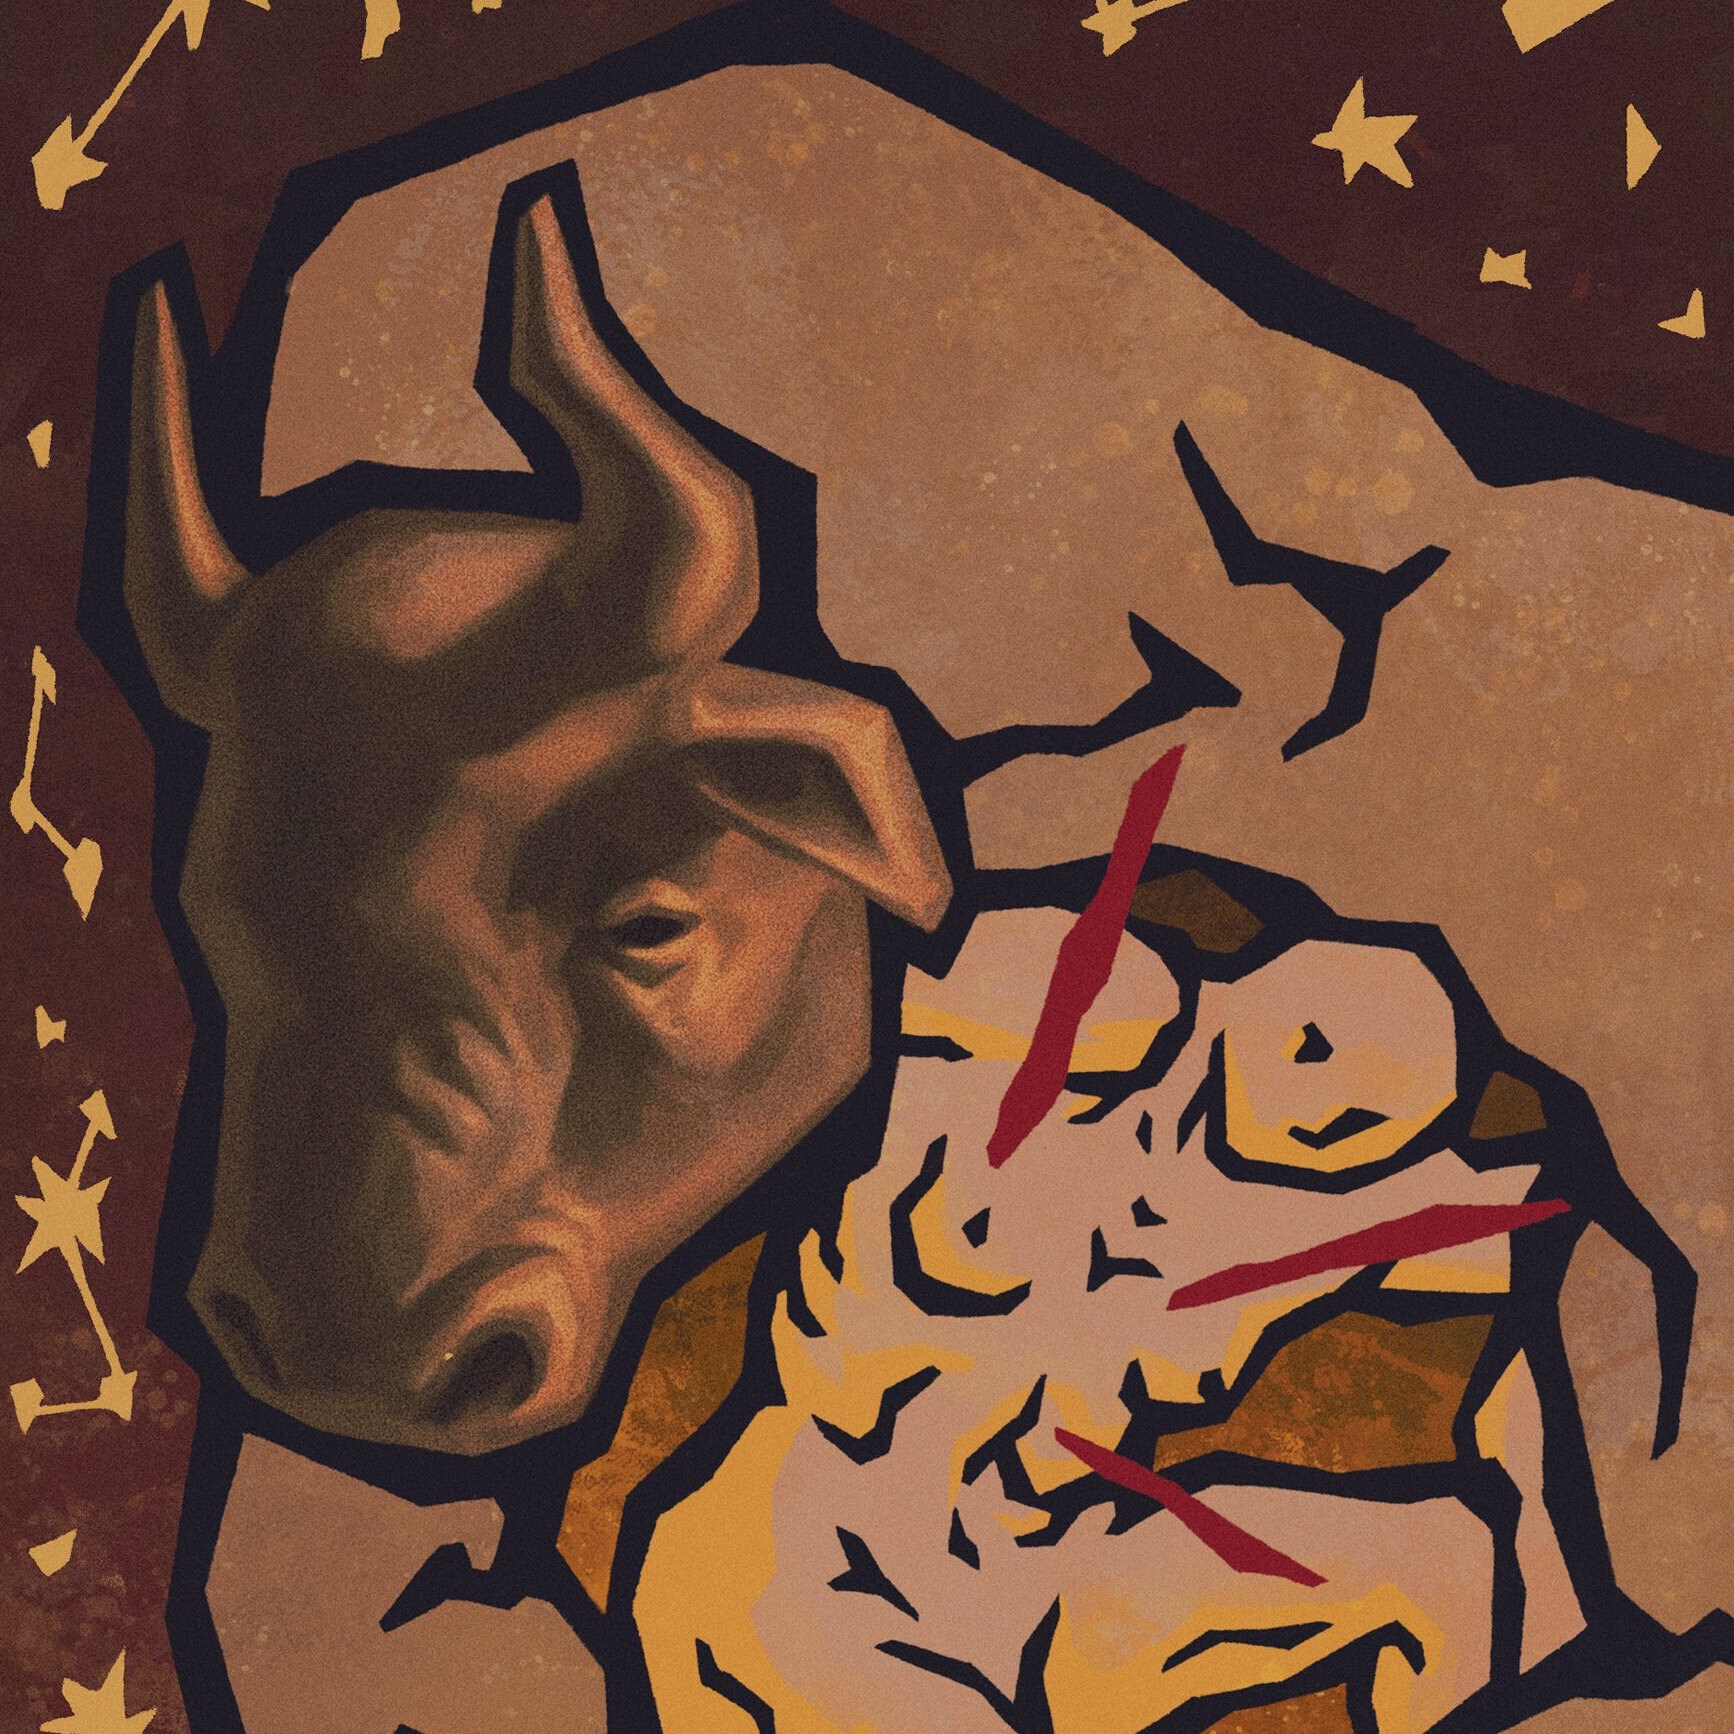 fine art print with hand painted silver embellishments The Brazen Bull